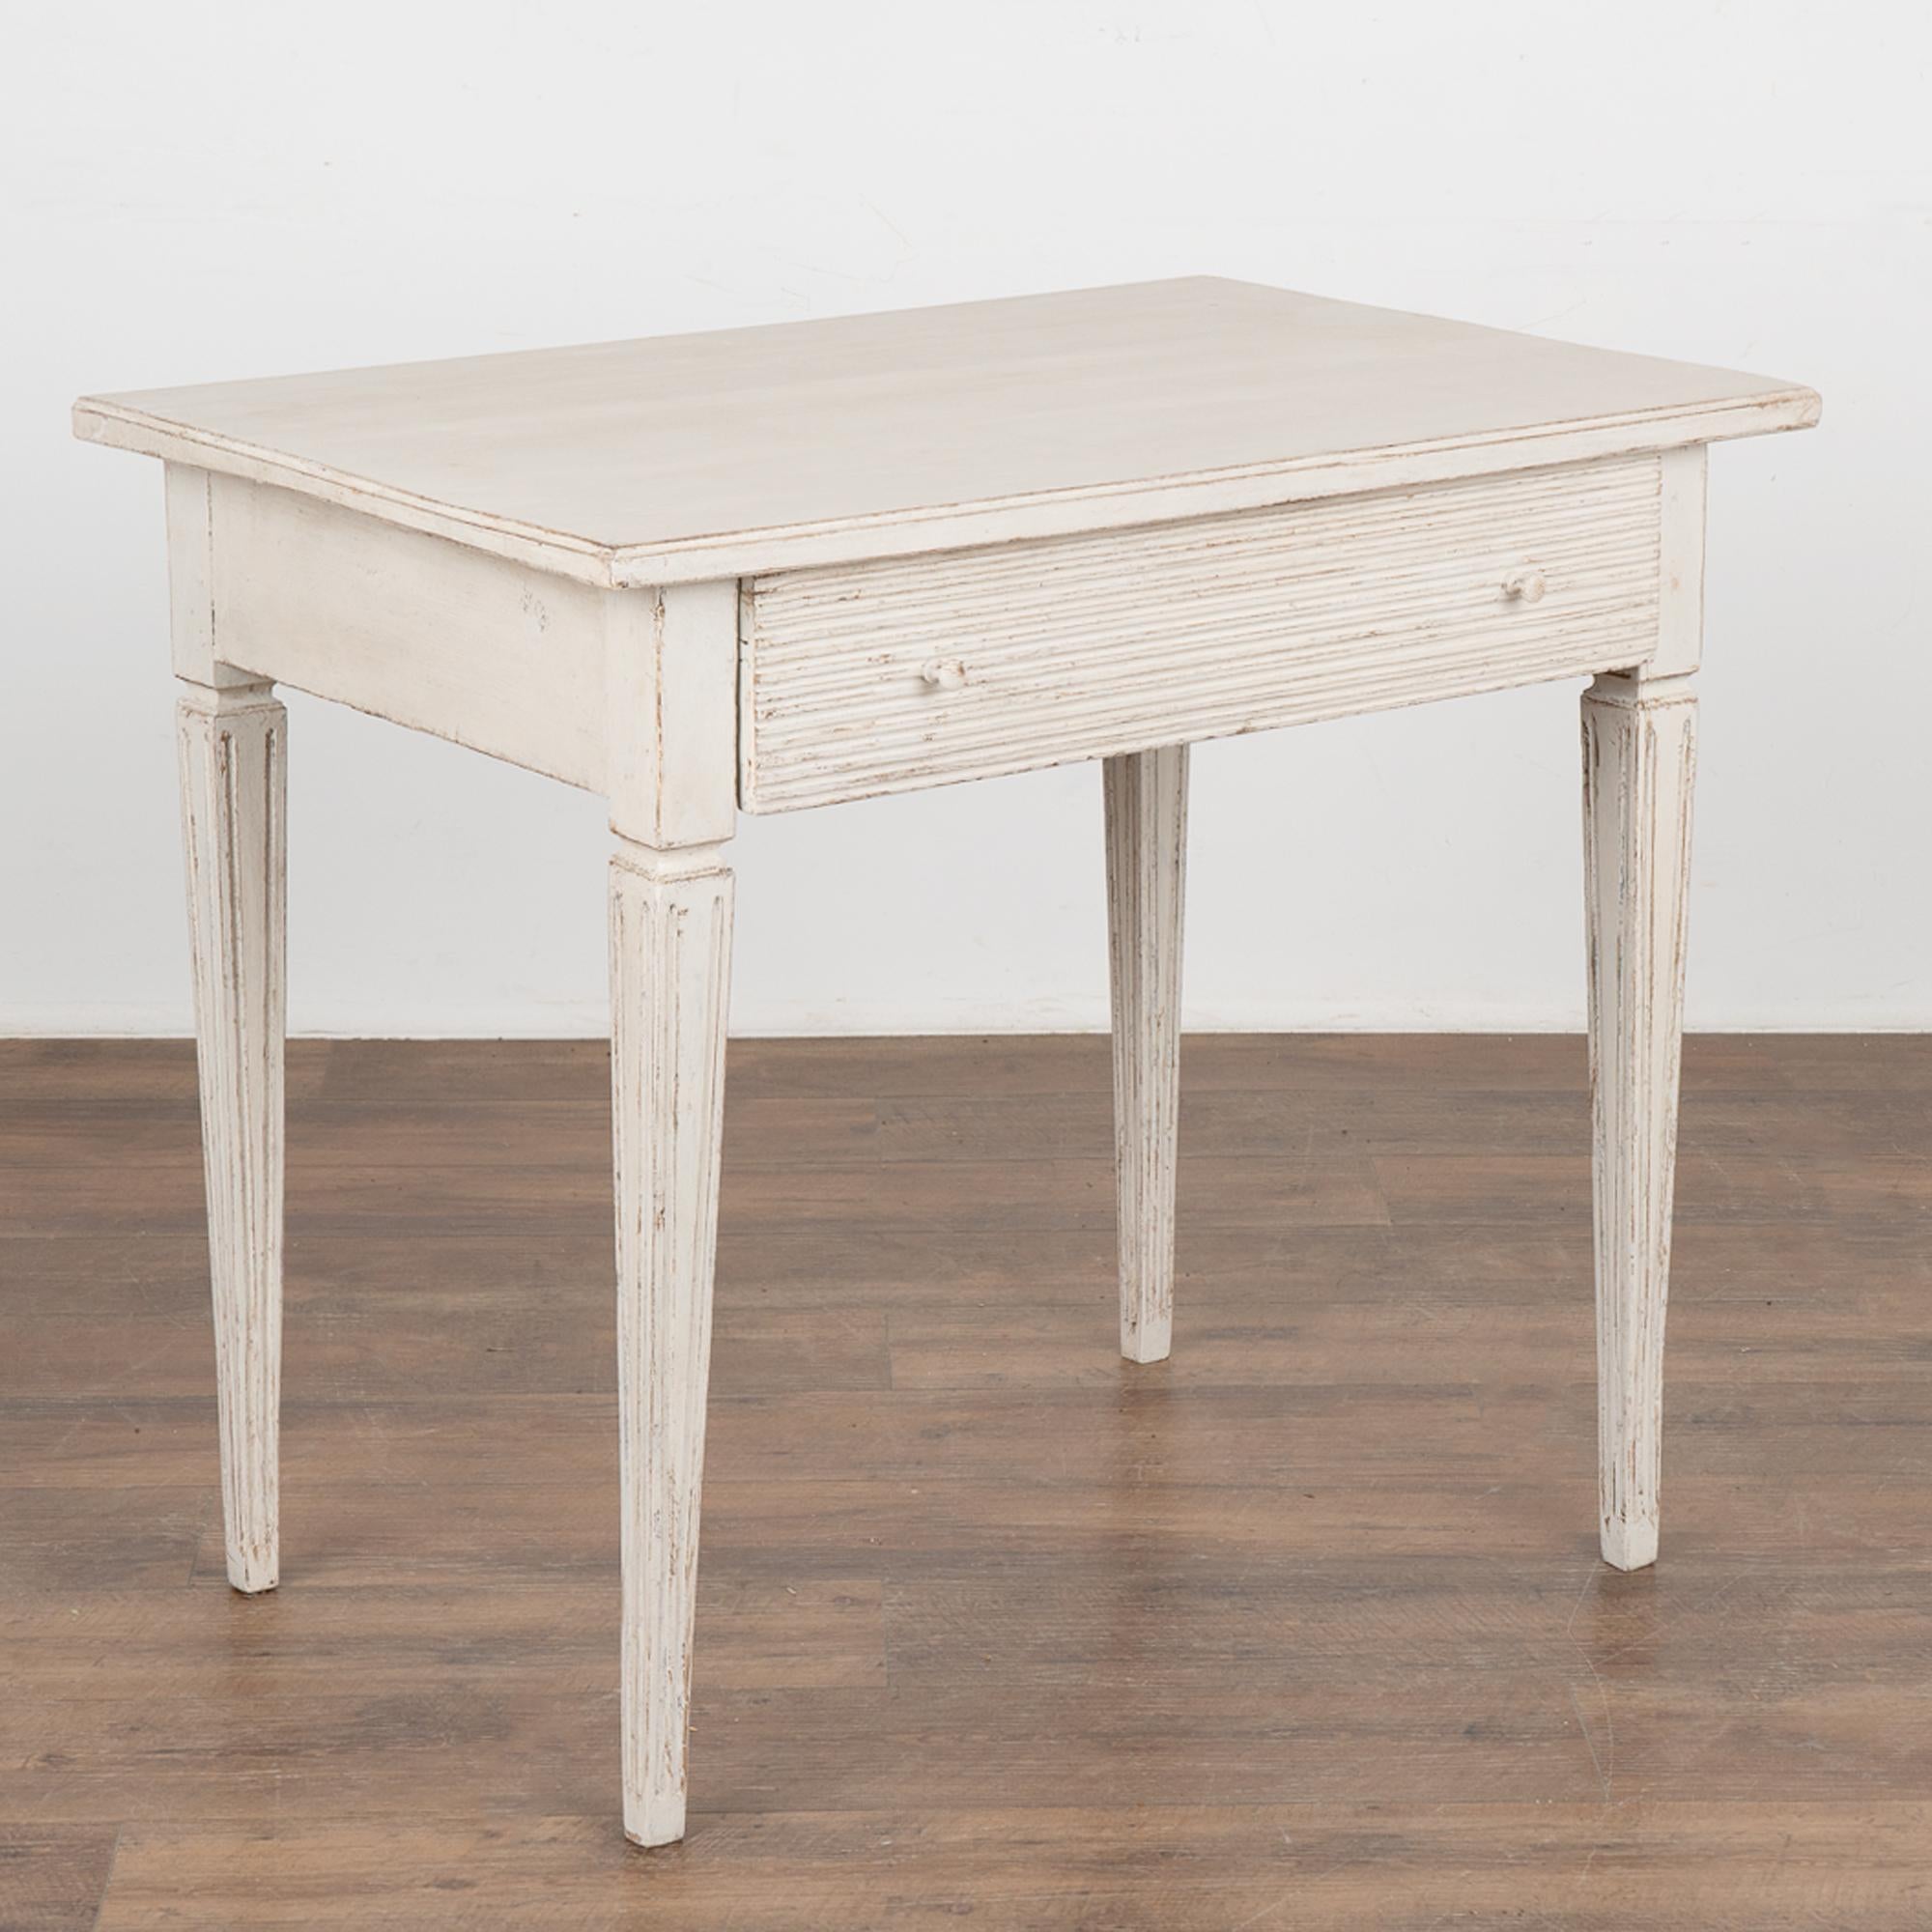 Antique Swedish Gustavian White Painted Side Table With Drawer.
Tapered fluted legs and horizontal fluted carving along single drawer. May also serve as nightstand or small desk.
Floor to skirt height: 24